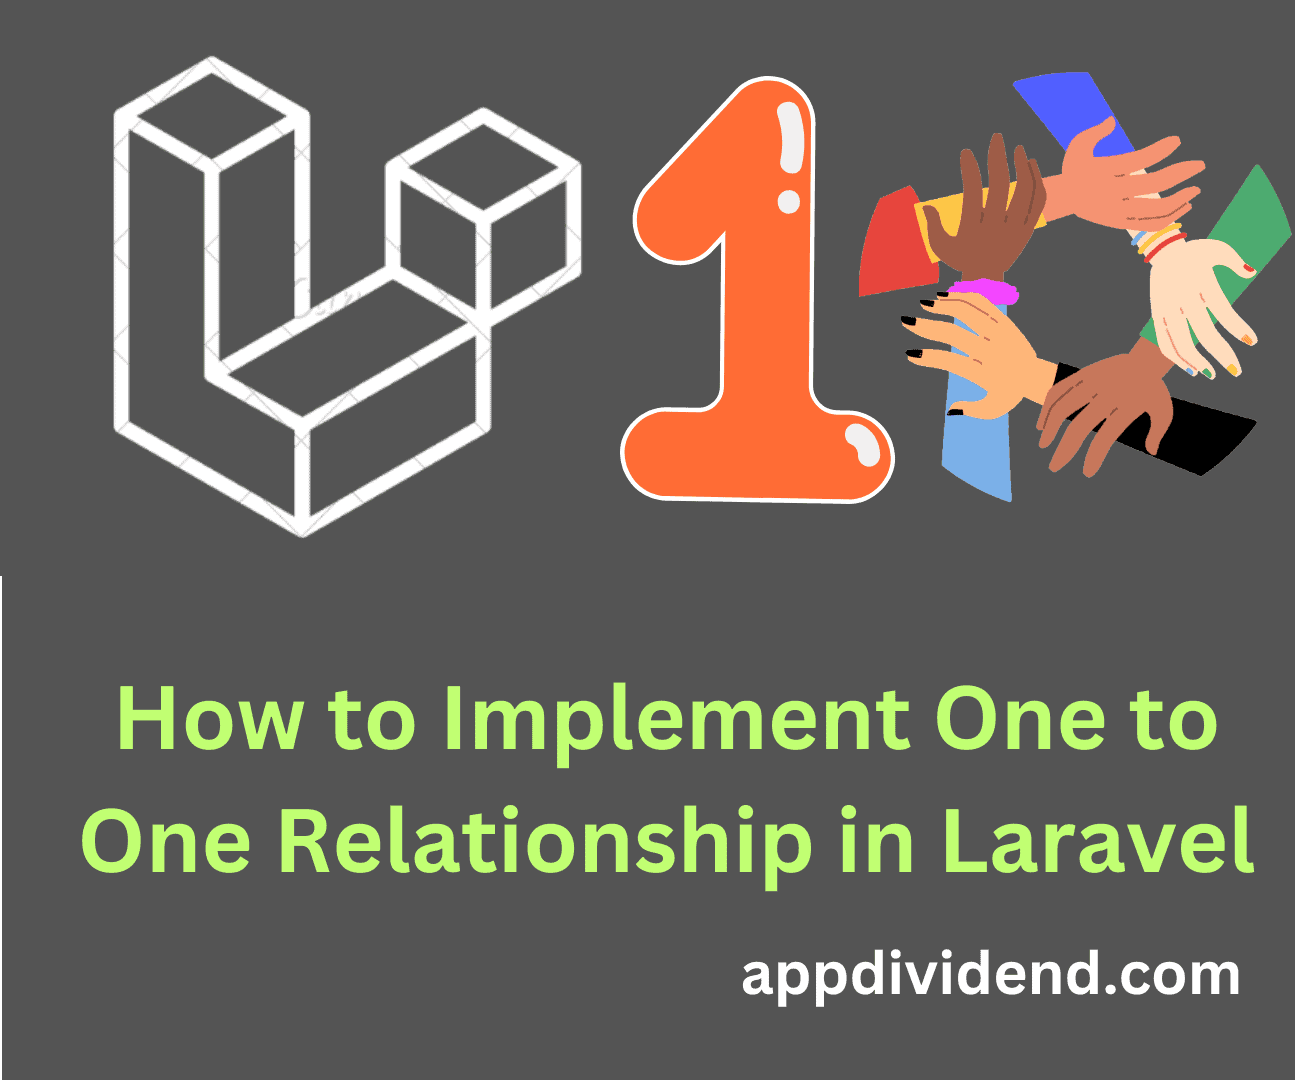 How to Implement One to One Relationship in Laravel